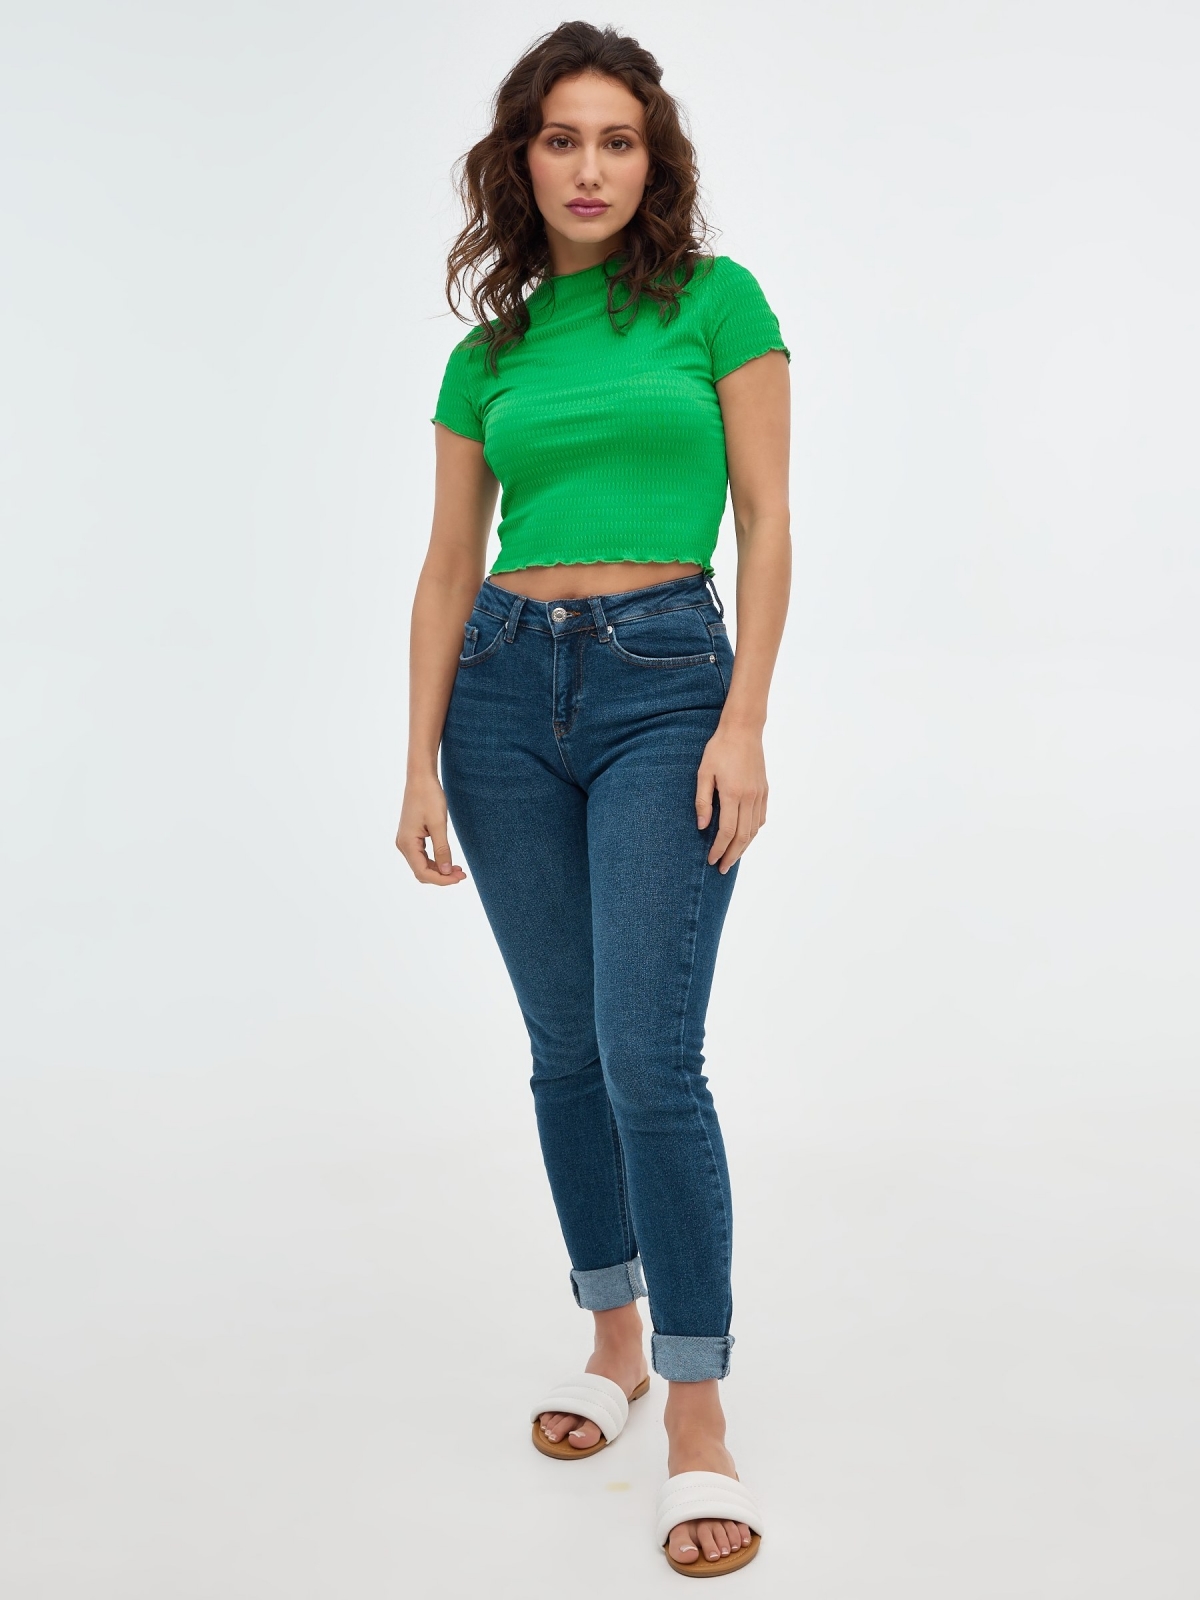 Textured curly t-shirt green front view